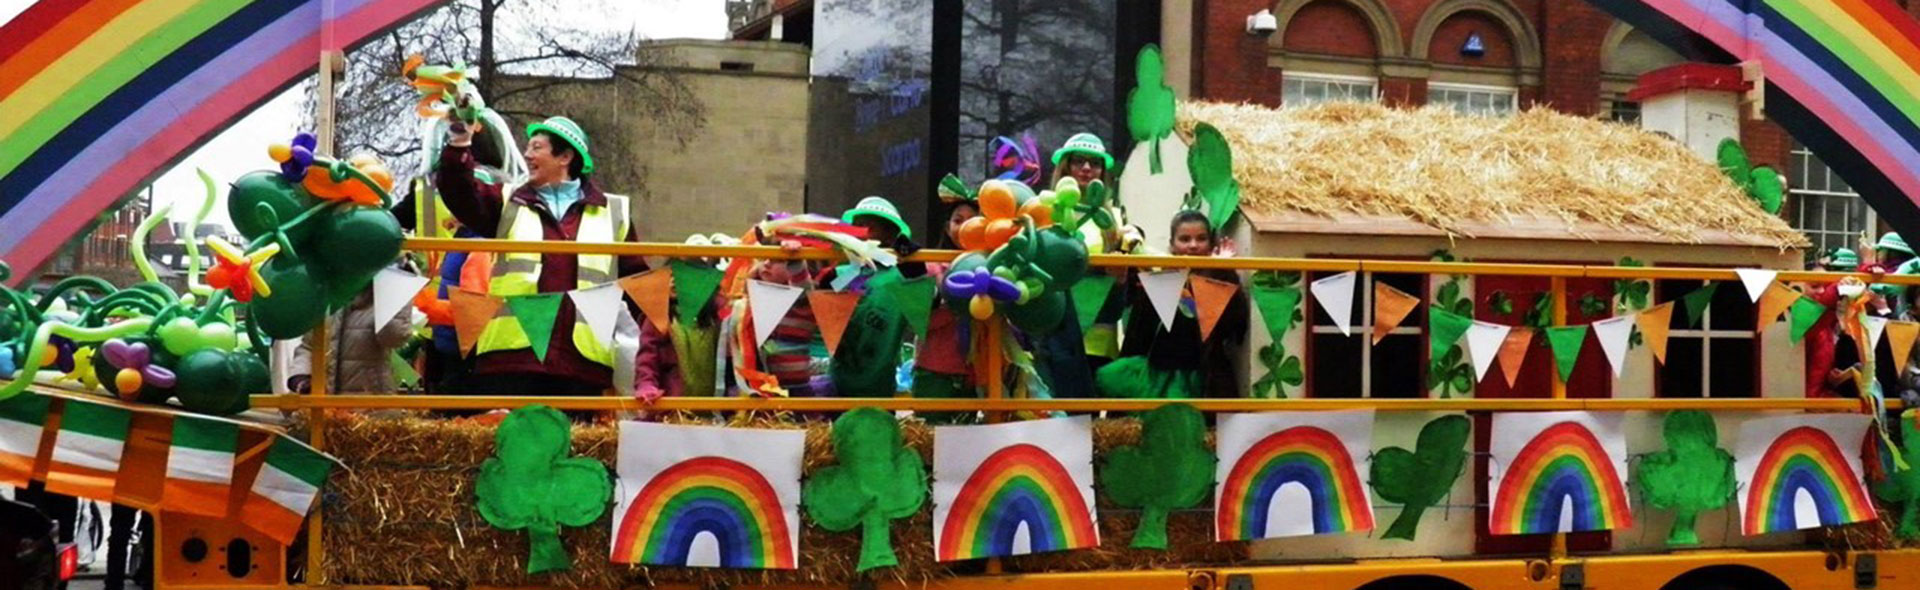 St Patrick's Day parade Leeds: Live updates from Millennium Square